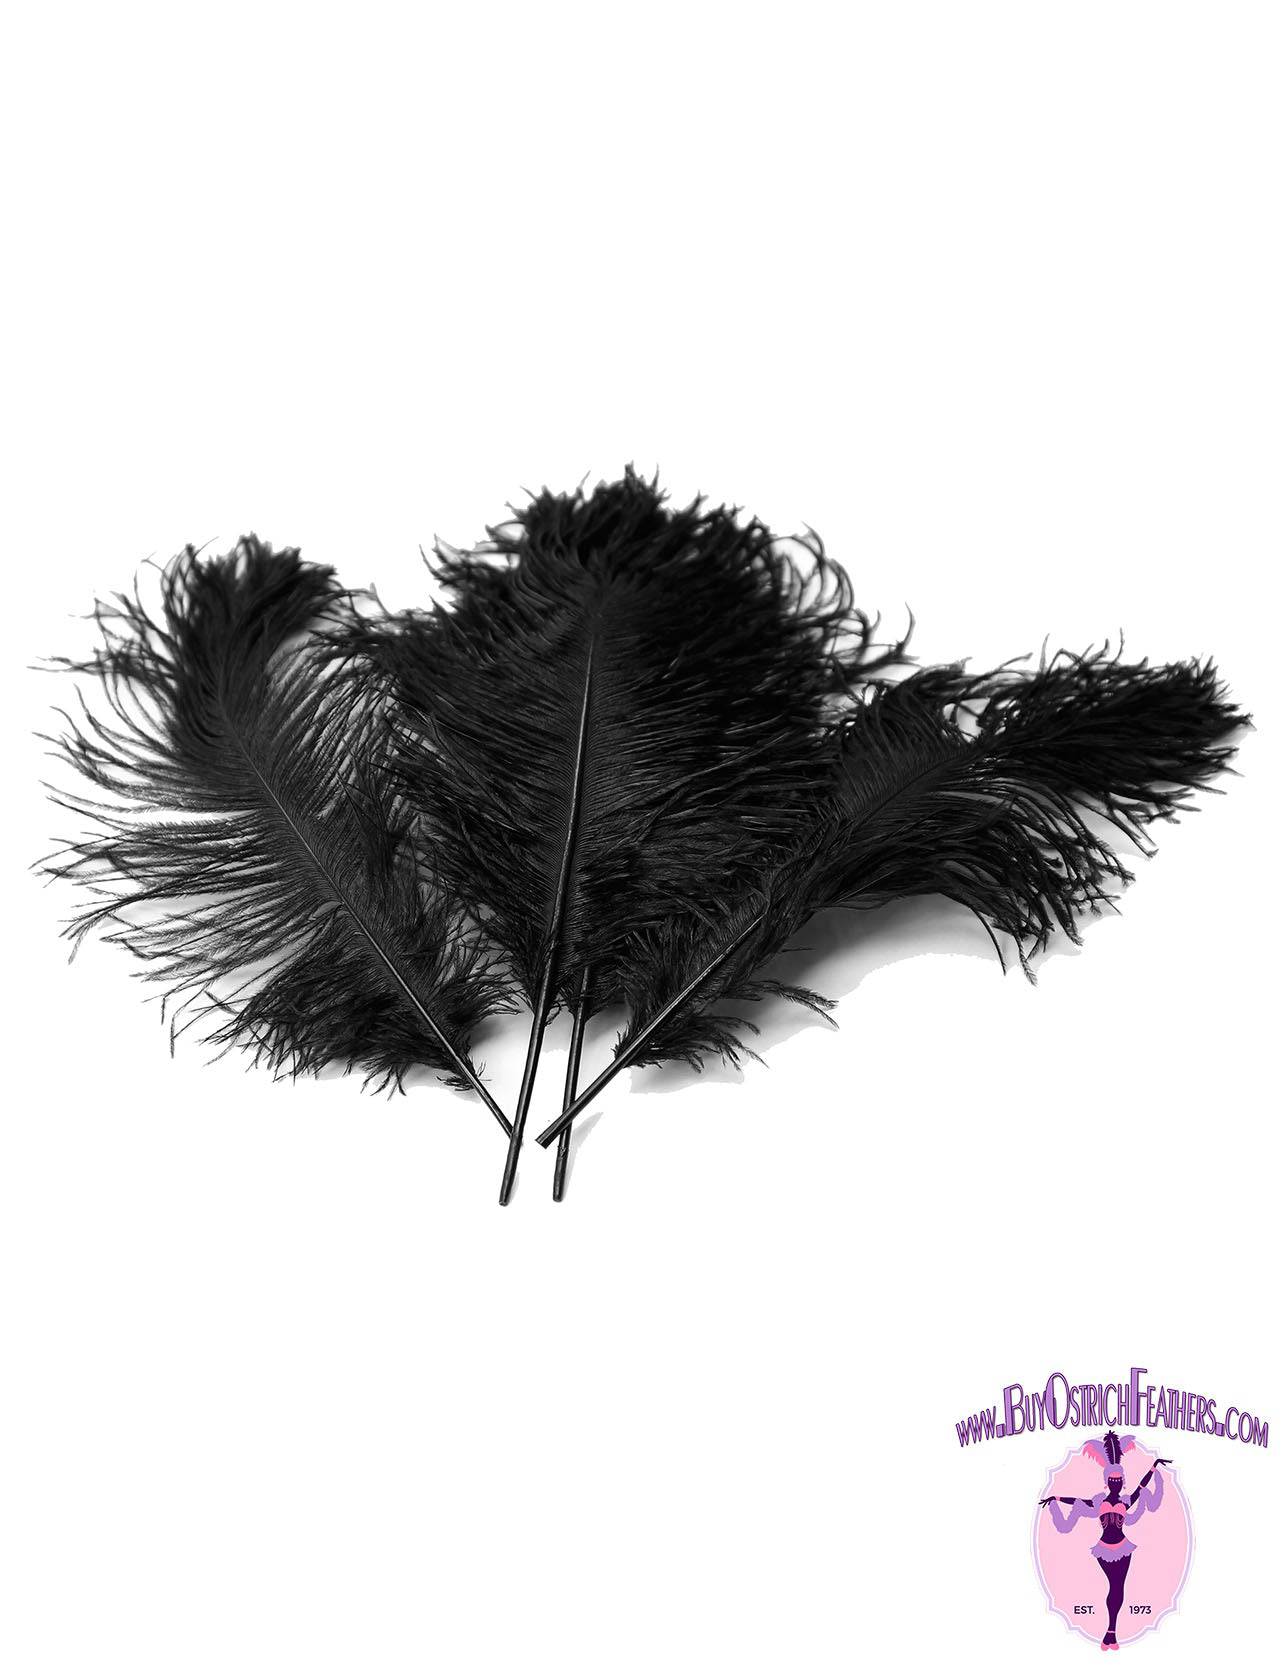 Ostrich Feather Tail Plumes 15-18" (Black) - Buy Ostrich Feathers